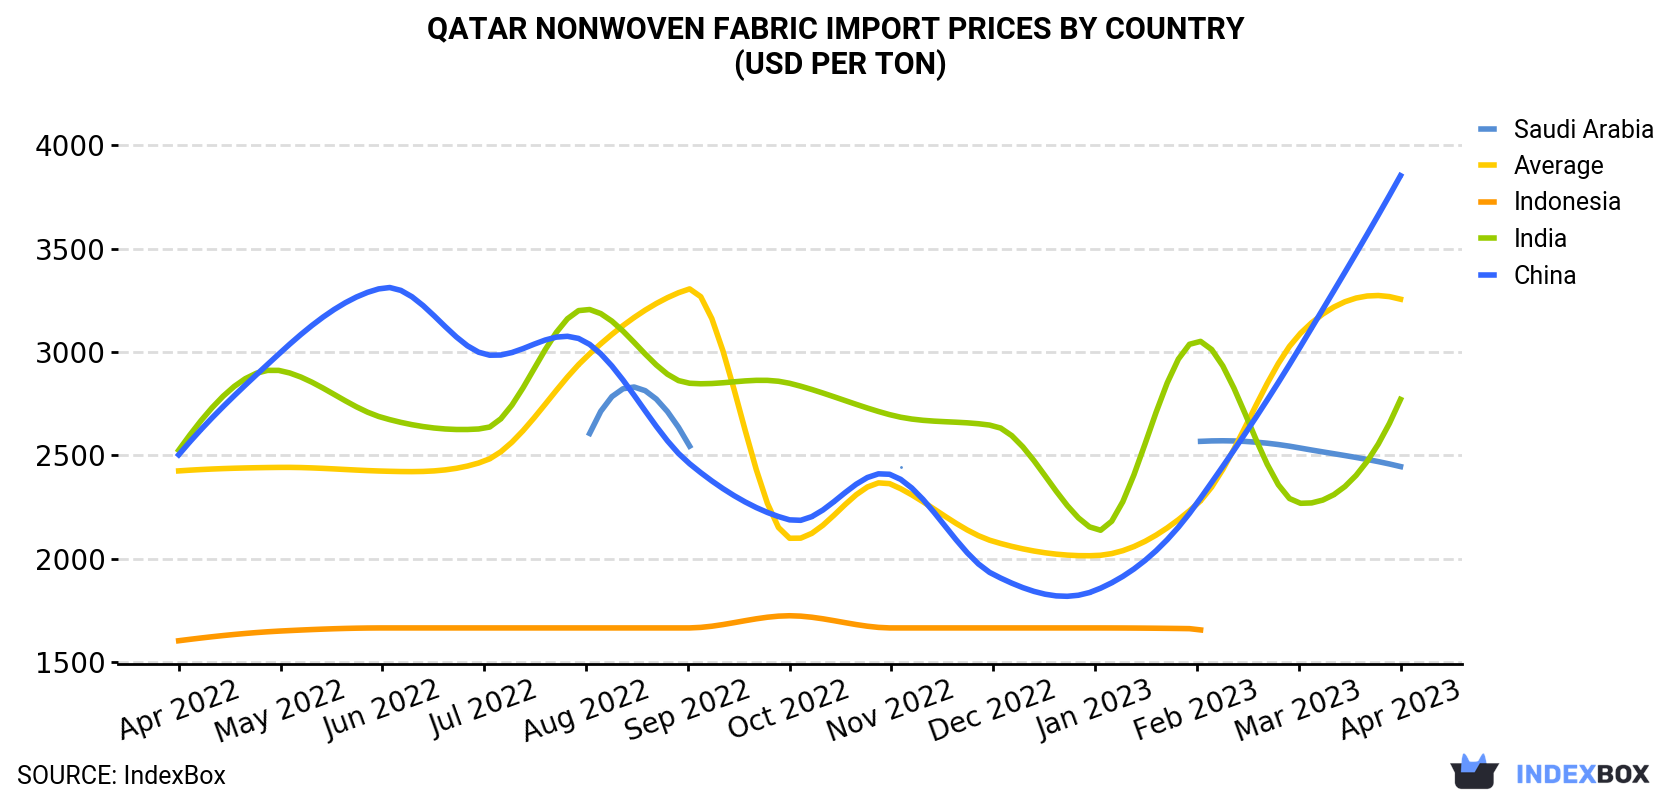 Qatar Nonwoven Fabric Import Prices By Country (USD Per Ton)